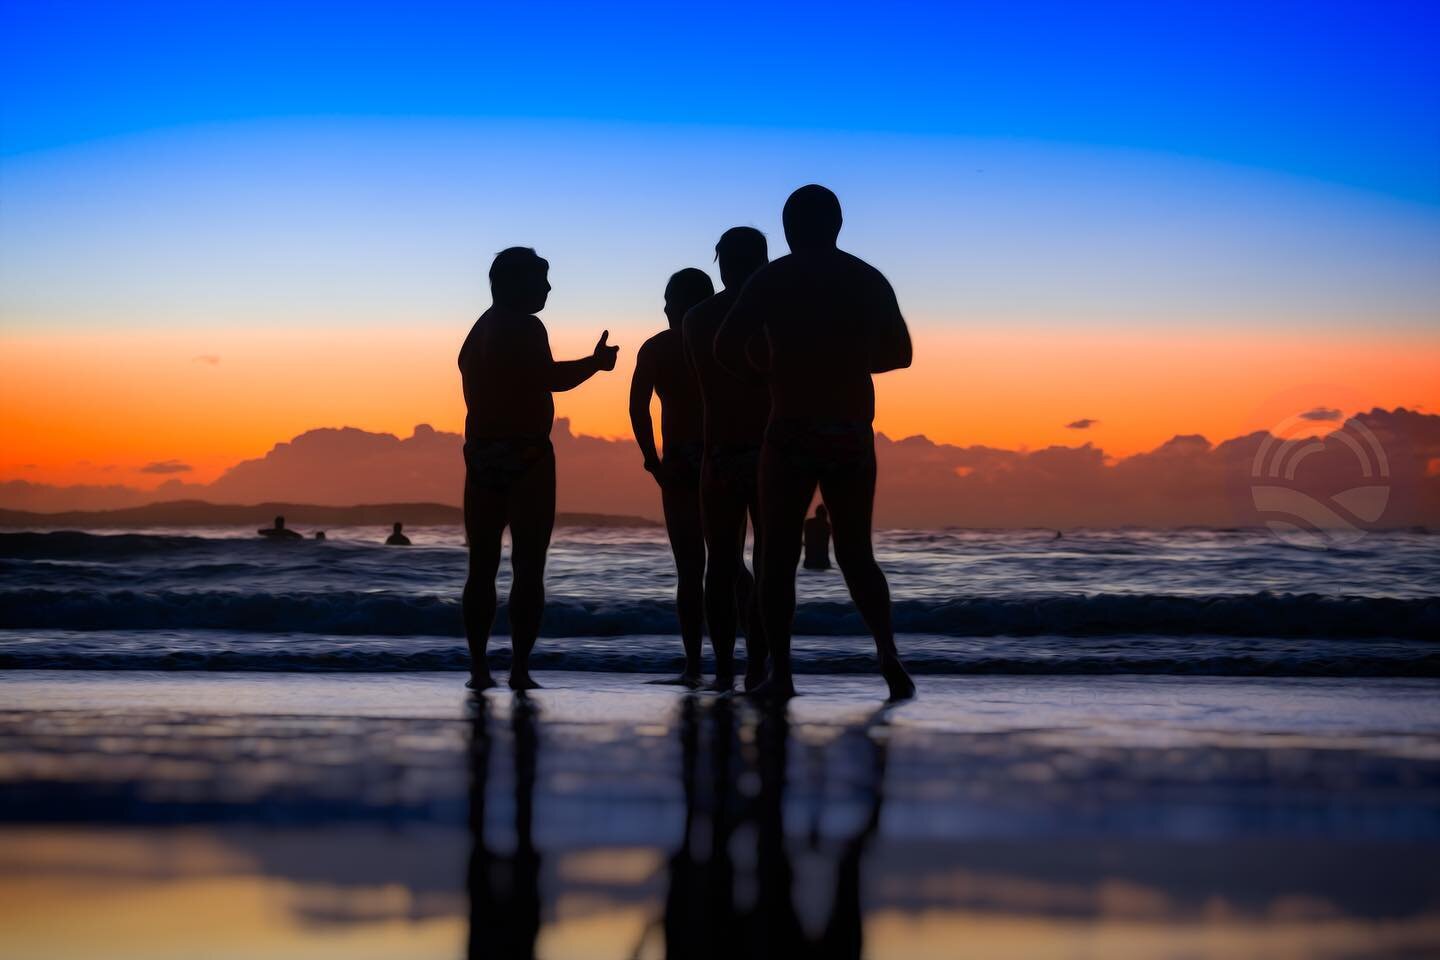 - Hole in One golf lessons -
Sunrise 19th May 2023
.
.
@peter05thomson @cronulla_gropers_ 
#sunrise #silhouette #swimmers #cronullabeach #cronulla #beach